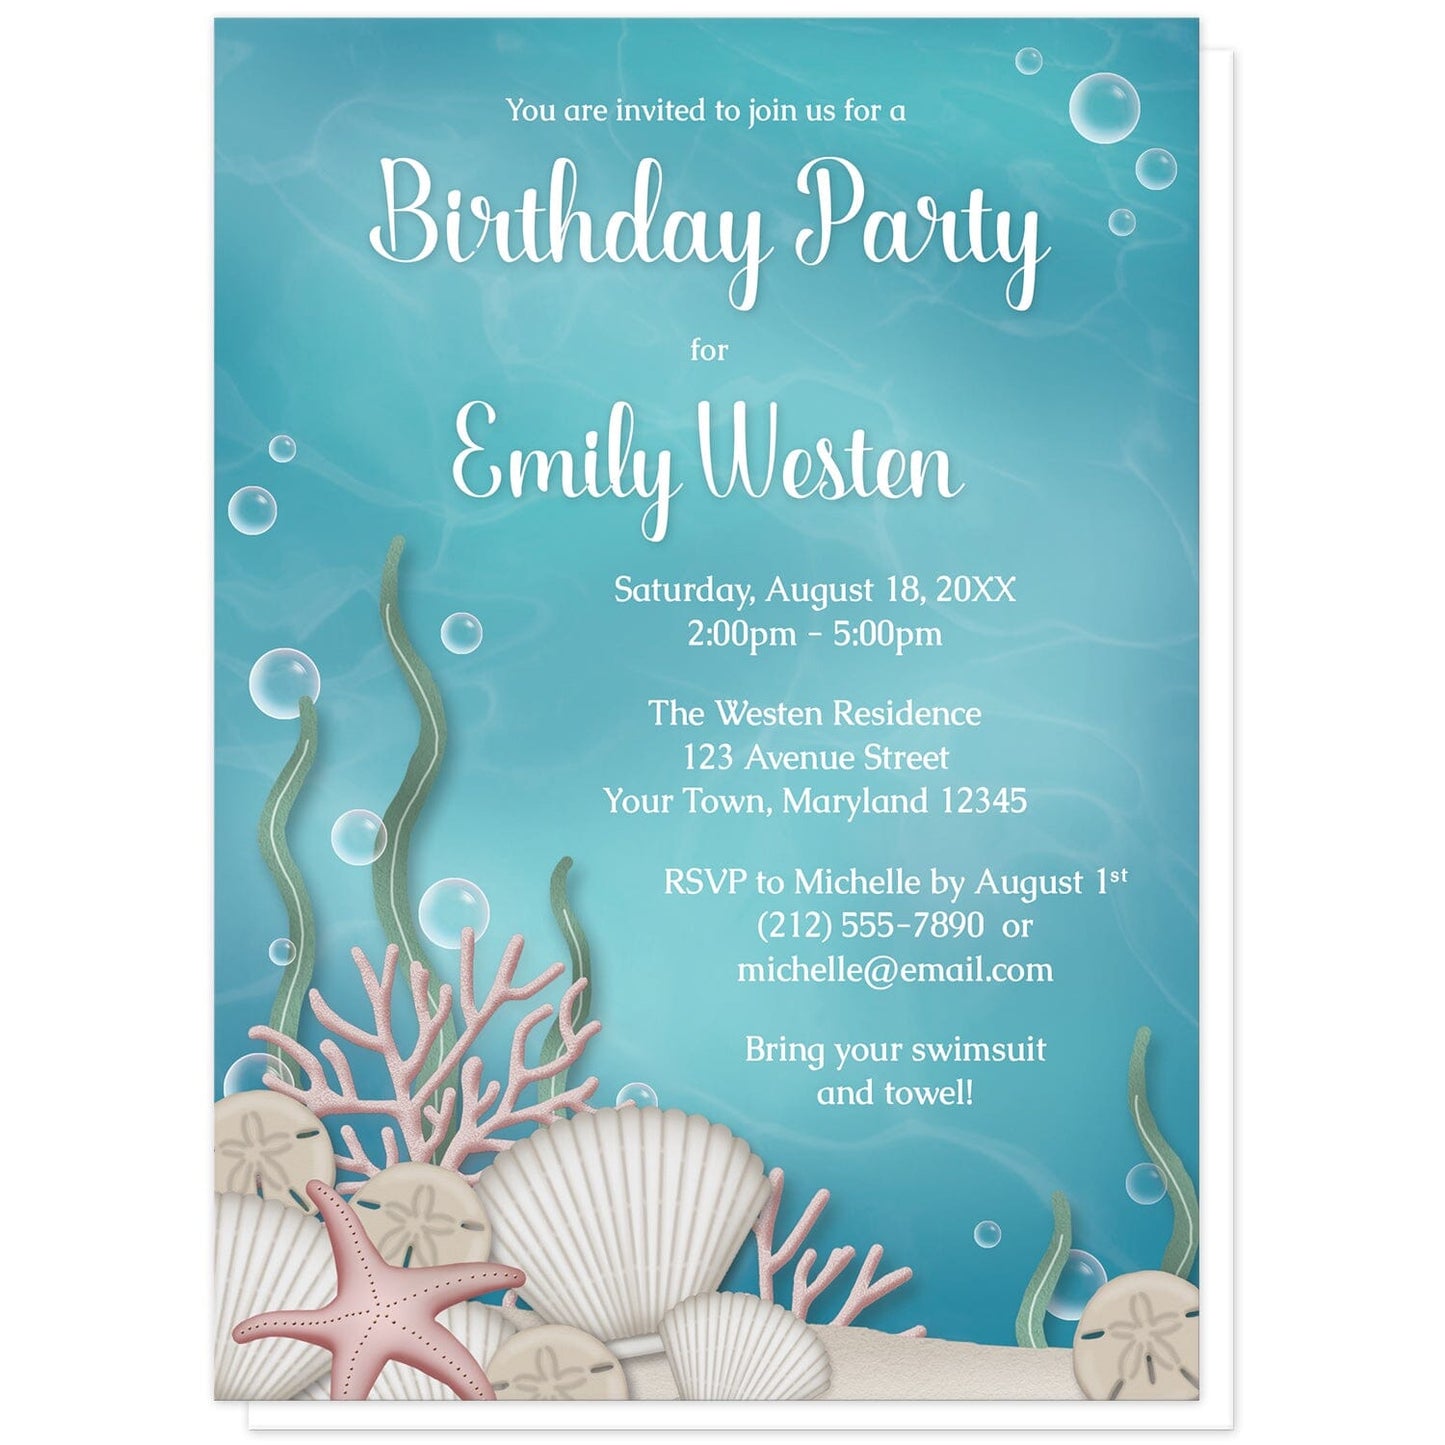 Whimsical Under the Sea Birthday Party Invitations at Artistically Invited. Beautifully illustrated whimsical under the sea birthday party invitations with an under the sea or aquarium theme. They are designed with a sandy seabed, assorted seashells, bubbles, coral, and kelp with an underwater aqua blue water background. Your personalized birthday party details are custom printed in white over the water background.